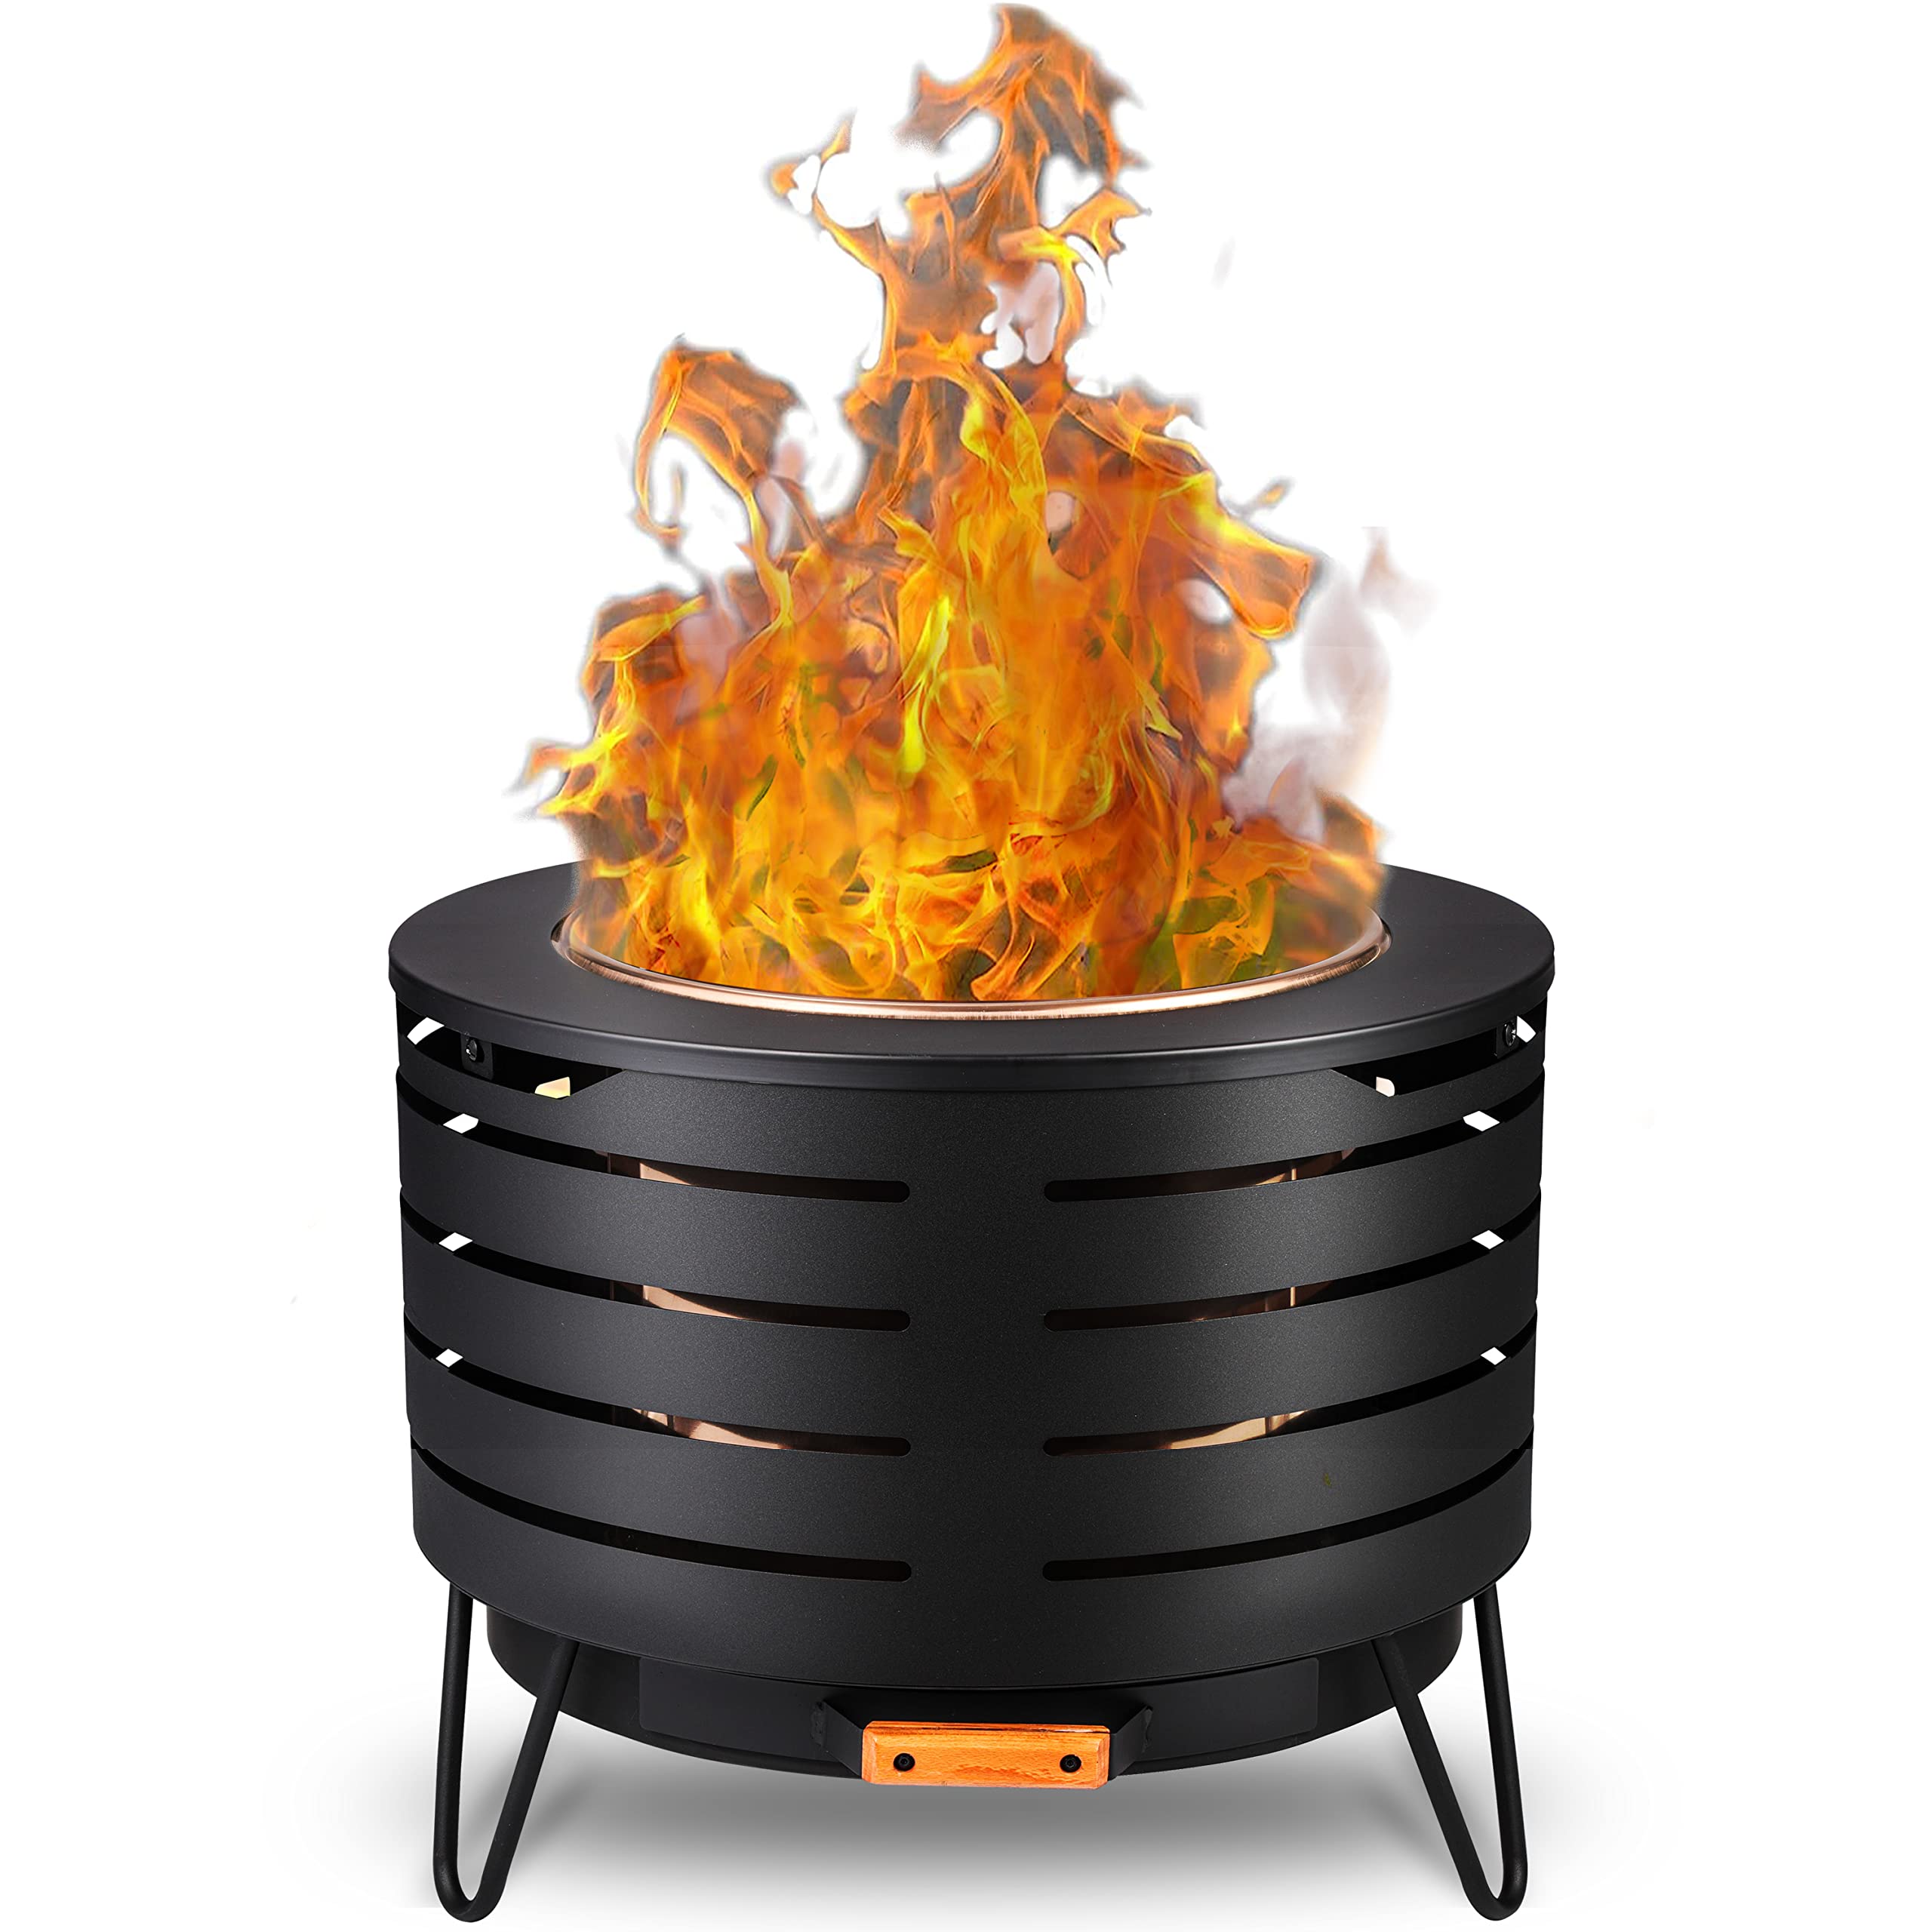 70+ Free Fire Pit & Fire Images - Pixabay - Clip Art Library